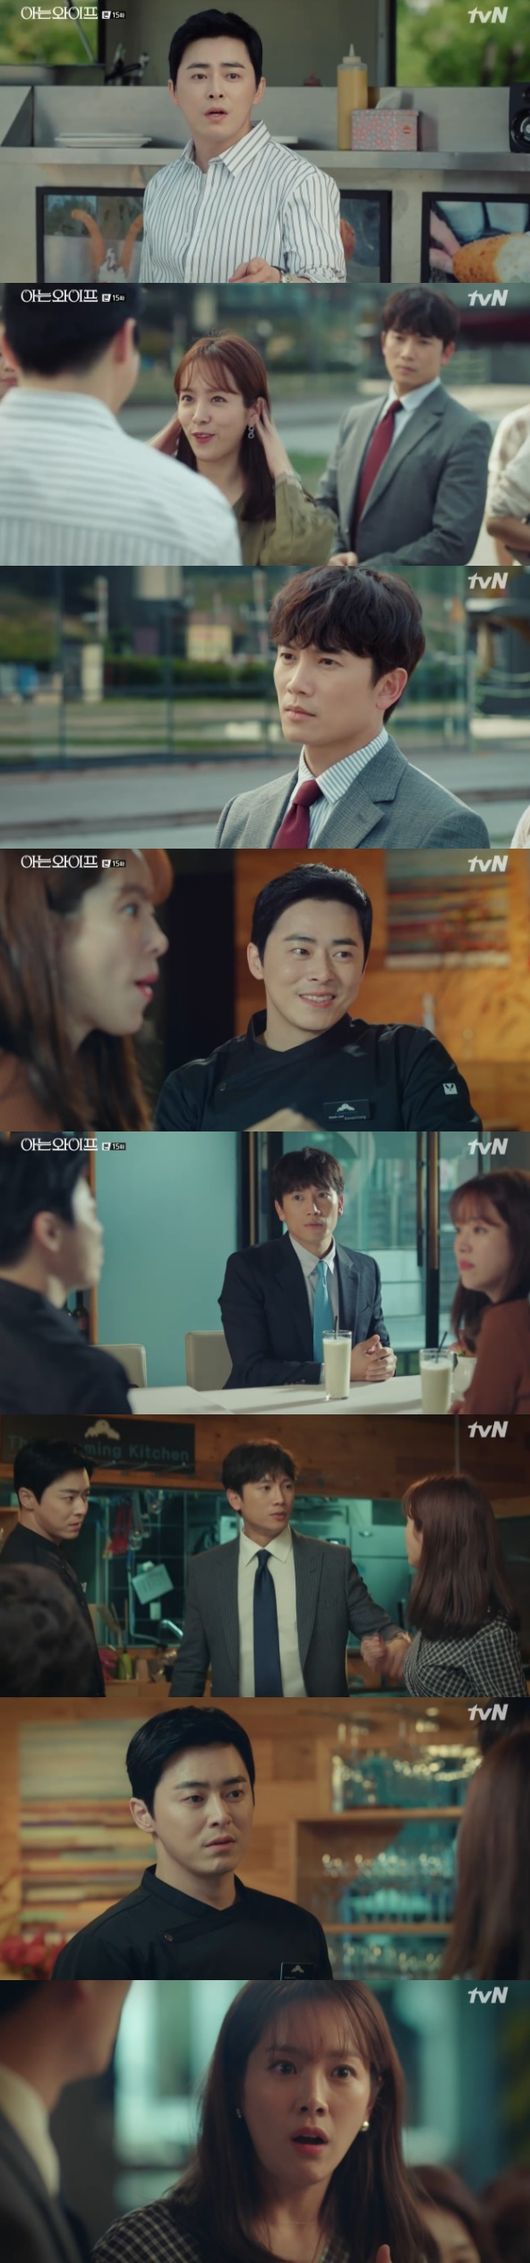 Knowing Wife Ji Sung and Han Ji-min showed realistic love and raised consensus.On TVNs Knowing Wife, which aired on Wednesday afternoon, Cha Ju-hyuk (Ji Sung Boon) and Seo Woo Jin (Han Ji-min Boon) were shown fighting for love because of the Starchef Prince Edward Island River (Jo Jung-suk Boon).Cha Ju-hyuk and Seo Woo Jin, who have been turning around and confirming each others hearts, have had a happy day saying, Lets just love for the time being.Cha Ju-hyuk introduced Seo Woo Jin to his parents at his brothers wedding, and also tried to disclose his relationship to his World Bank co-workers.However, the plan was broken due to the branch manager Cha Bong-hee (Son Jong-hak), and the secret love affair was unintentionally continued.Meanwhile, the Star Chef Prince Edward Island River (Jo Jung-suk Boone) appeared in front of Cha Ju-hyuk and Seo Woo Jin.Prince Edward Island River was a college club senior at Seo Woo Jin and a well-known celebrity with his first love.The Prince Edward Island River wanted to consult Seo Woo Jin about the new restaurant household loan issue with the meeting with Seo Woo Jin.The staffs salary bankbook also called the branch manager directly to ask him to do it as a World Bank where Seo Woo Jin works.Seo Woo Jin visited restaurants on the Cha Ju-hyuk and Prince Edward Island rivers, while Cha Ju-hyuk was left unlucky on the pretending Prince Edward Island river.Cha Ju-hyuk was later jealous of the Prince Edward Island River, who called Seo Woo Jin when he had time, and the two argued.The Prince Edward Island River invited World Bank staff from its restaurant in Hannam-dong, with a deal with World Bank of Sea Woo Jin.Pitchin Cha Ju-hyuk did not go, wandered in the cinema.Yoon Jong-hoo said, The atmosphere here is not so bad. Prince Edward Island Kang seems to have a heart for Woojin.Turns out Prince Edward Island River was feeling emotion as a woman, not just a senior friend to Seo Woo Jin.Feeling a sense of crisis, Cha Ju-hyuk ran out of the movie theater and headed for the dinner place, suddenly grabbed the hand of Seo Woo Jin and said, We are together.I am meeting with you. All of them announced their friendship. It was a cute public love declaration that jealousy brought.After that, Cha Ju-hyuk and Seo Woo Jin showed a very ordinary love affair, such as telling the driver that they should never do it between lovers, and fighting for the house and leaving the house.On the other hand, in the ending, Cha Ju-hyuk wrote a message in his bankbook and proposed Lets get married, and Seo Woo JinCapture the broadcast screen for Knowing Wife